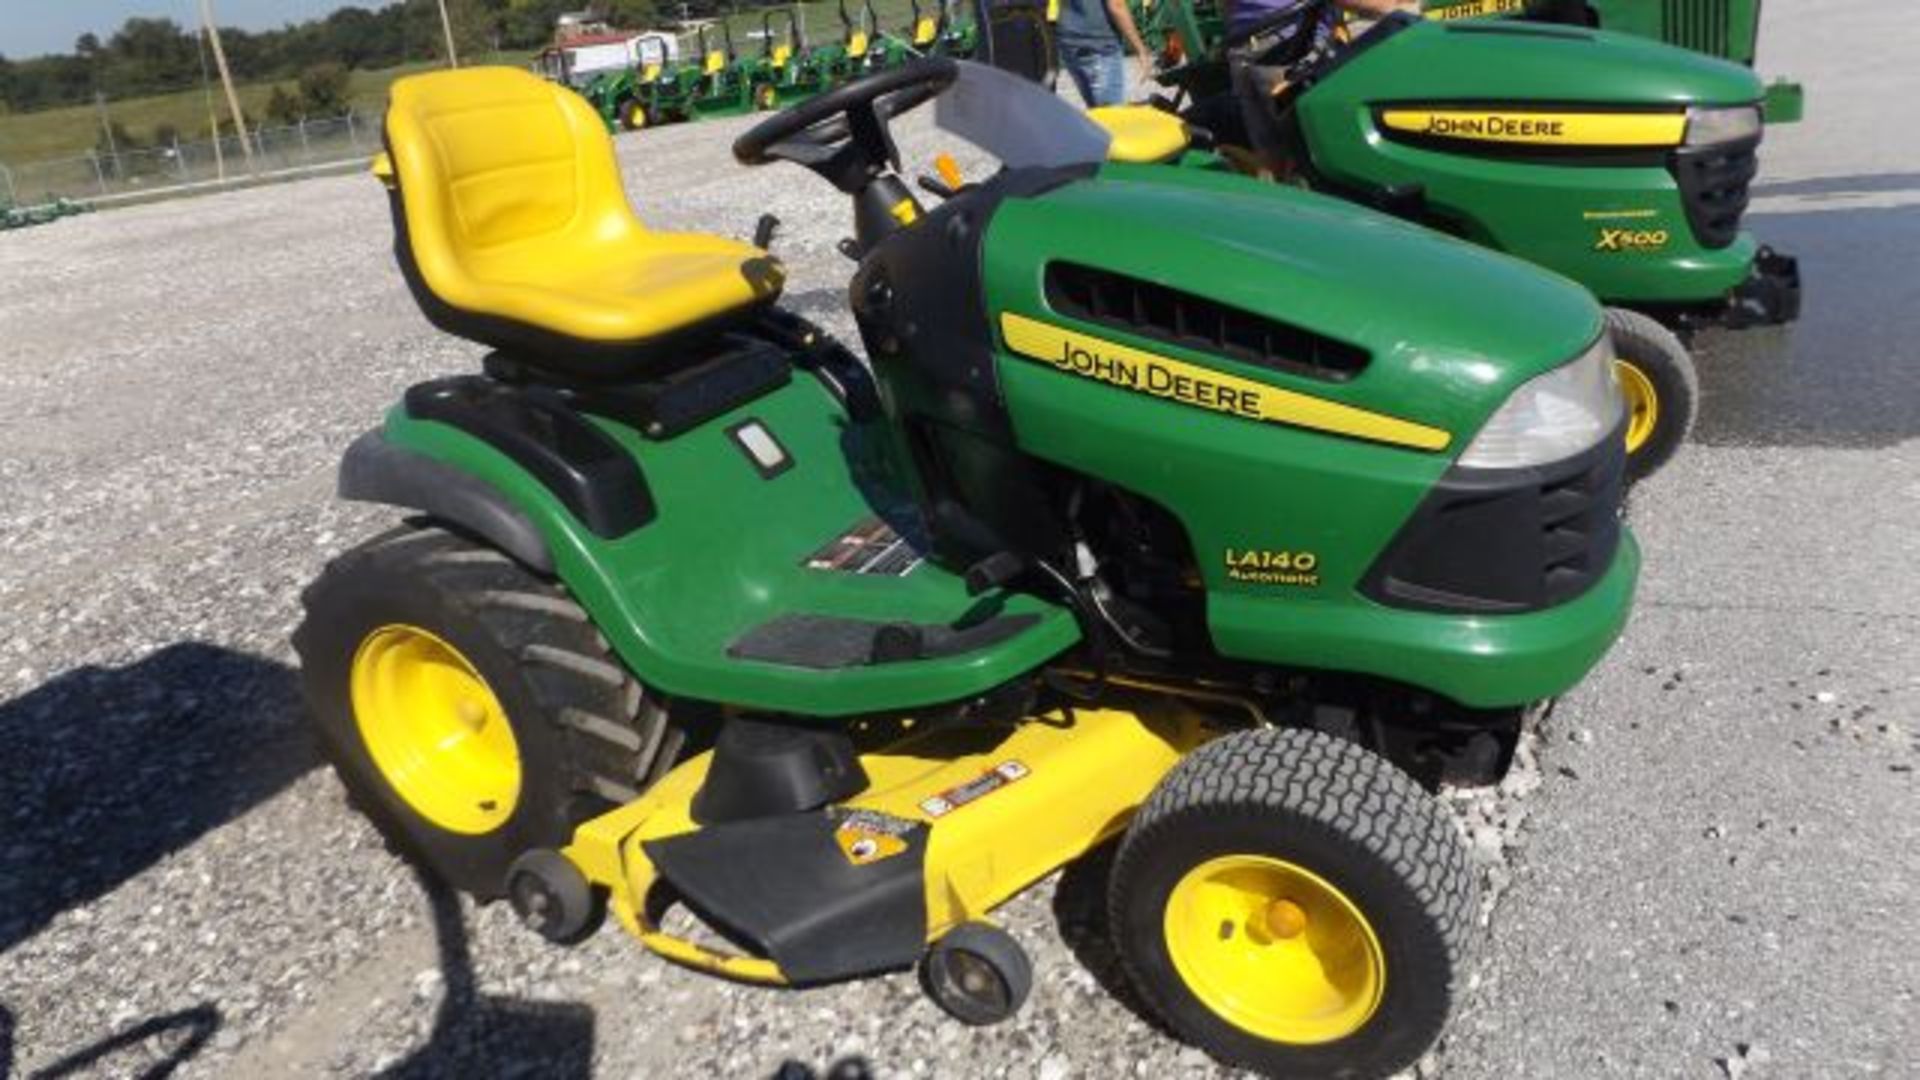 2007 JD LA140 Mower #112059, 158 hrs, 48" Deck, 23hp Briggs, Air Cooled, Hydro, Rear Weights, 46" - Image 2 of 3